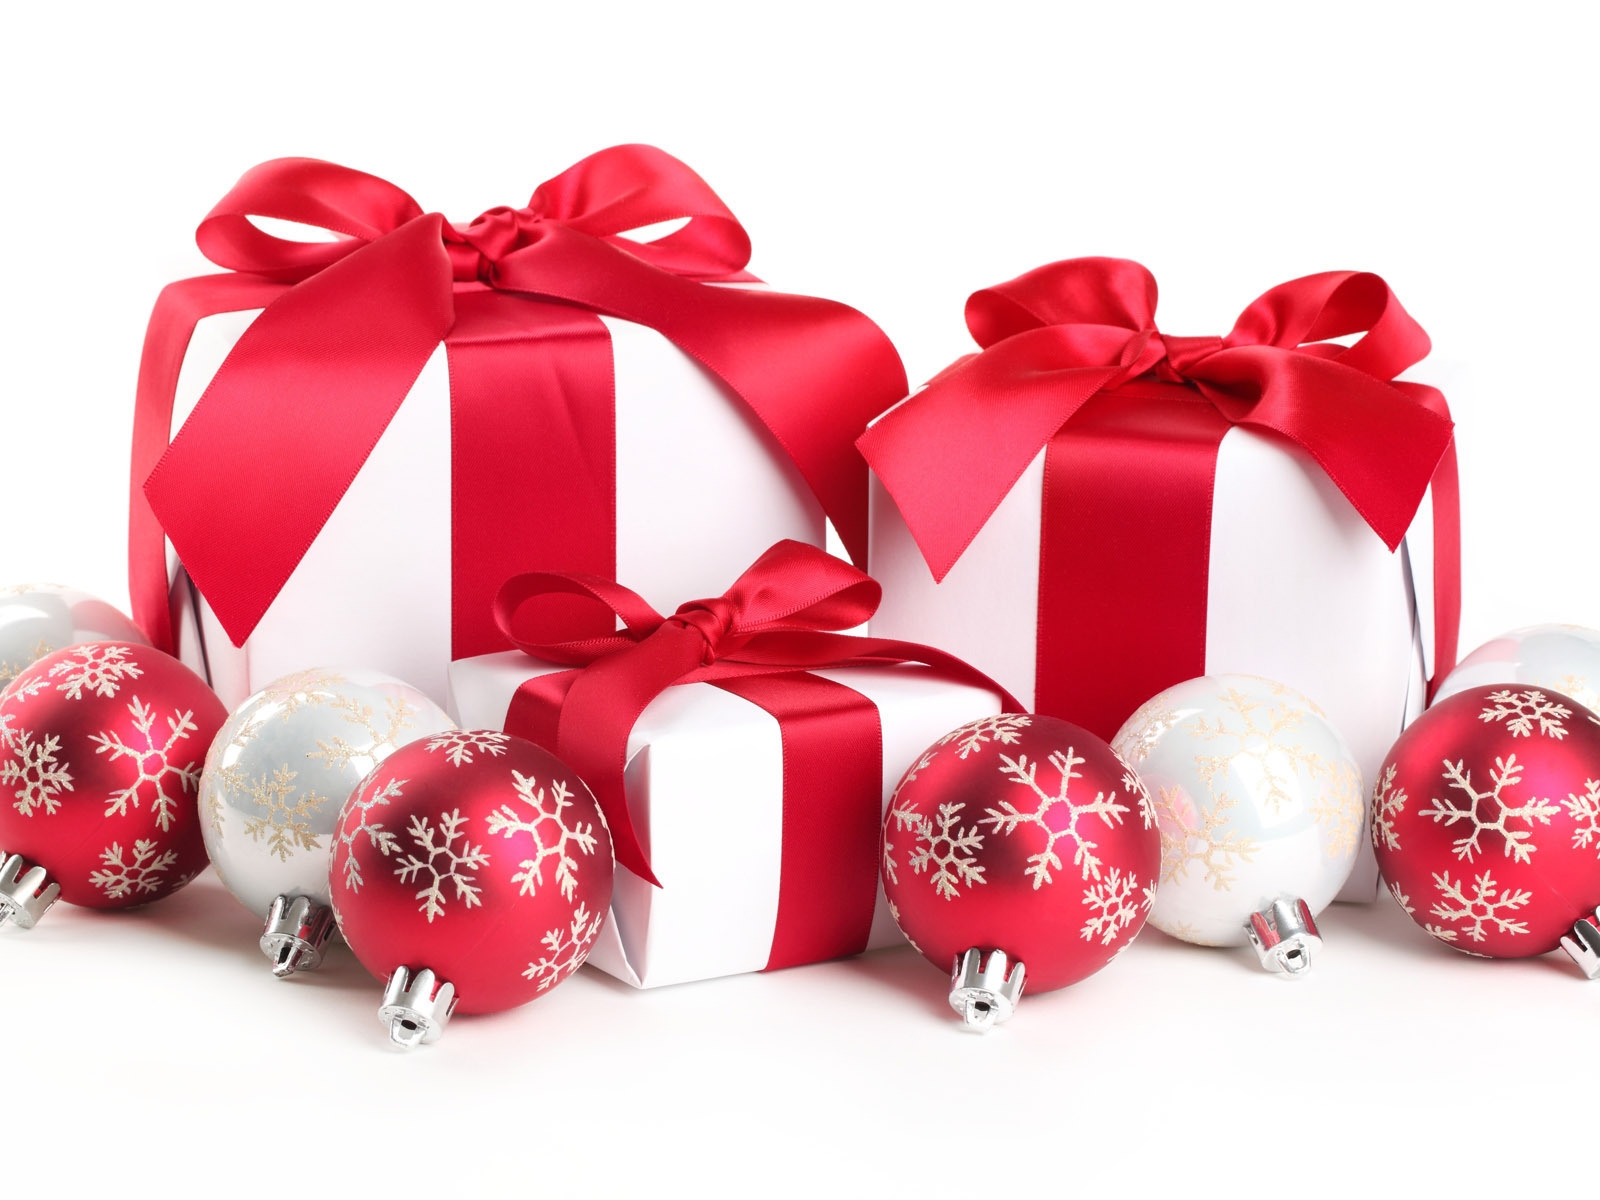 Red Christmas Gifts - Red And White Christmas Gifts , HD Wallpaper & Backgrounds